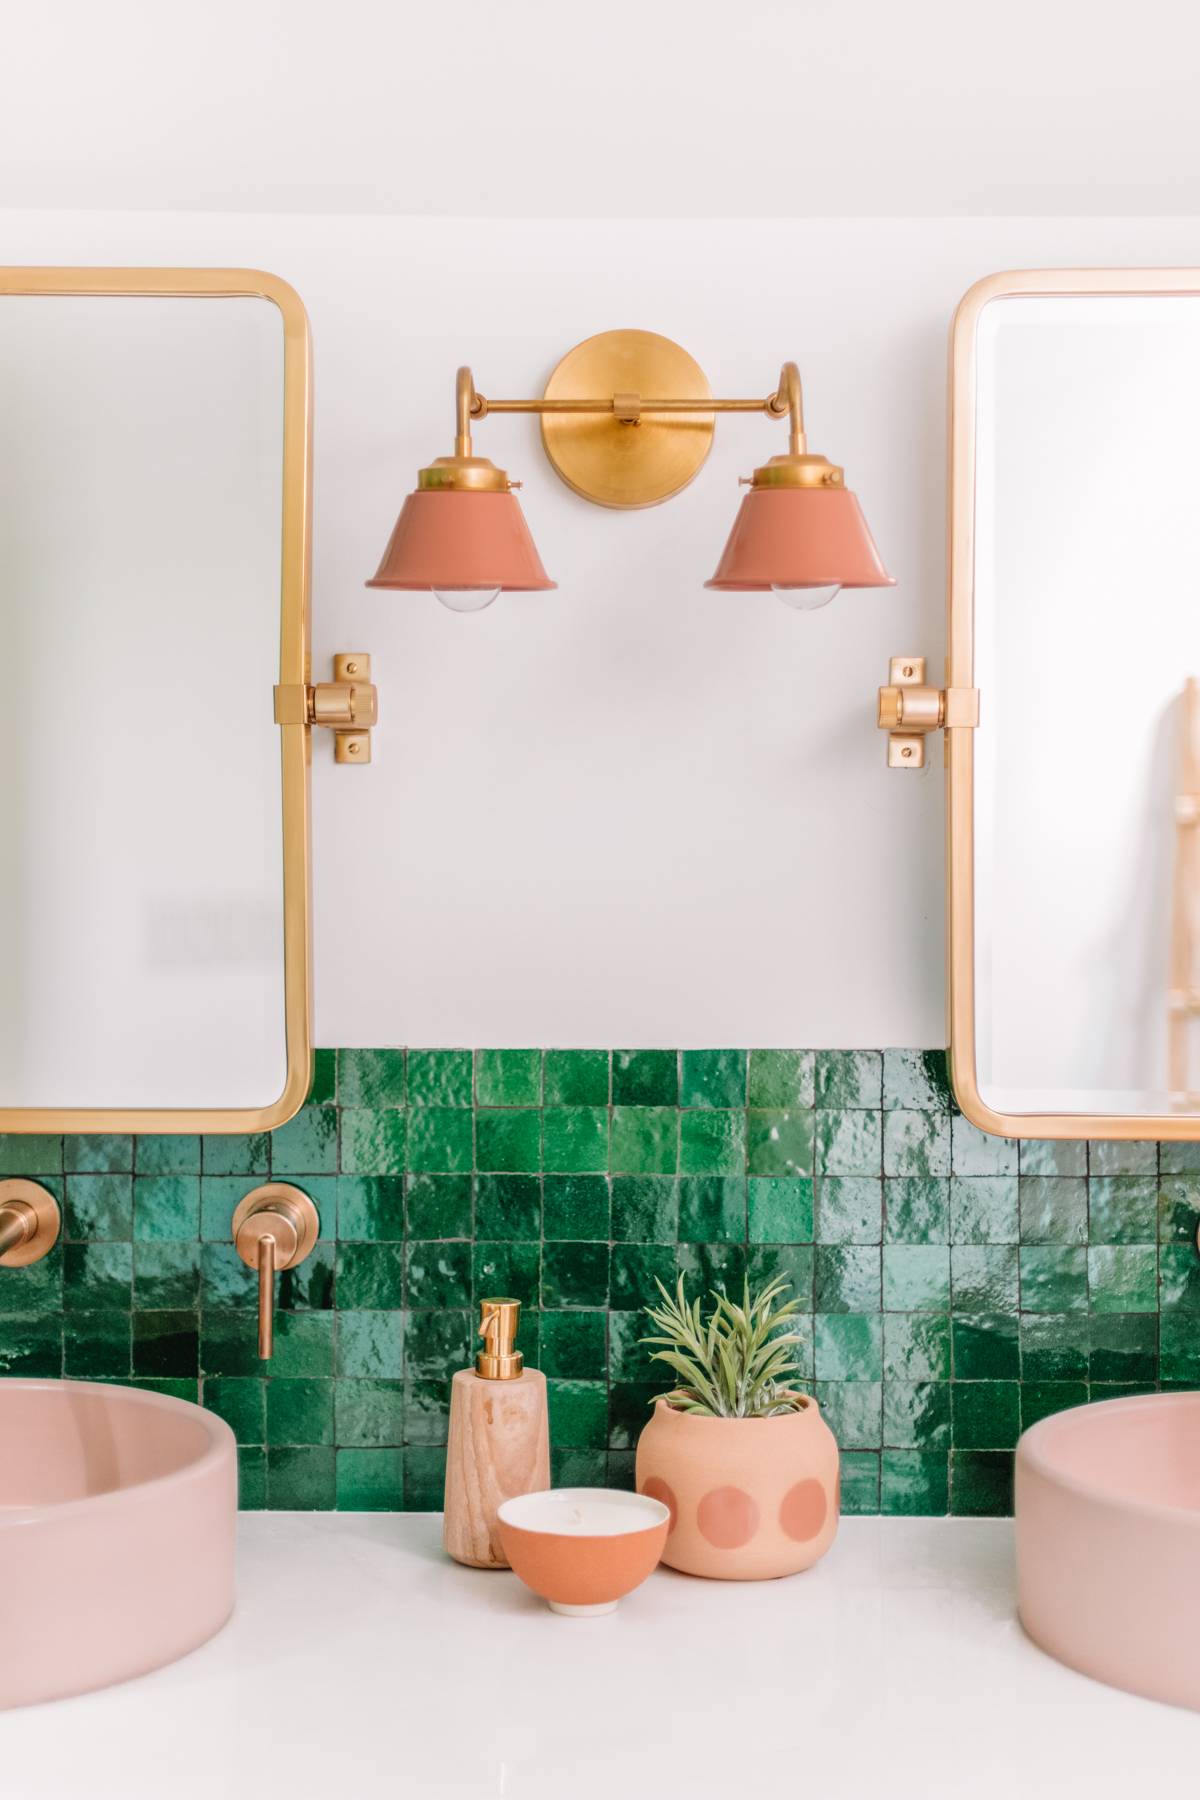 Pink-Bathroom-Sconces-and-Accessories-Photo-by-StudioDIY-48669